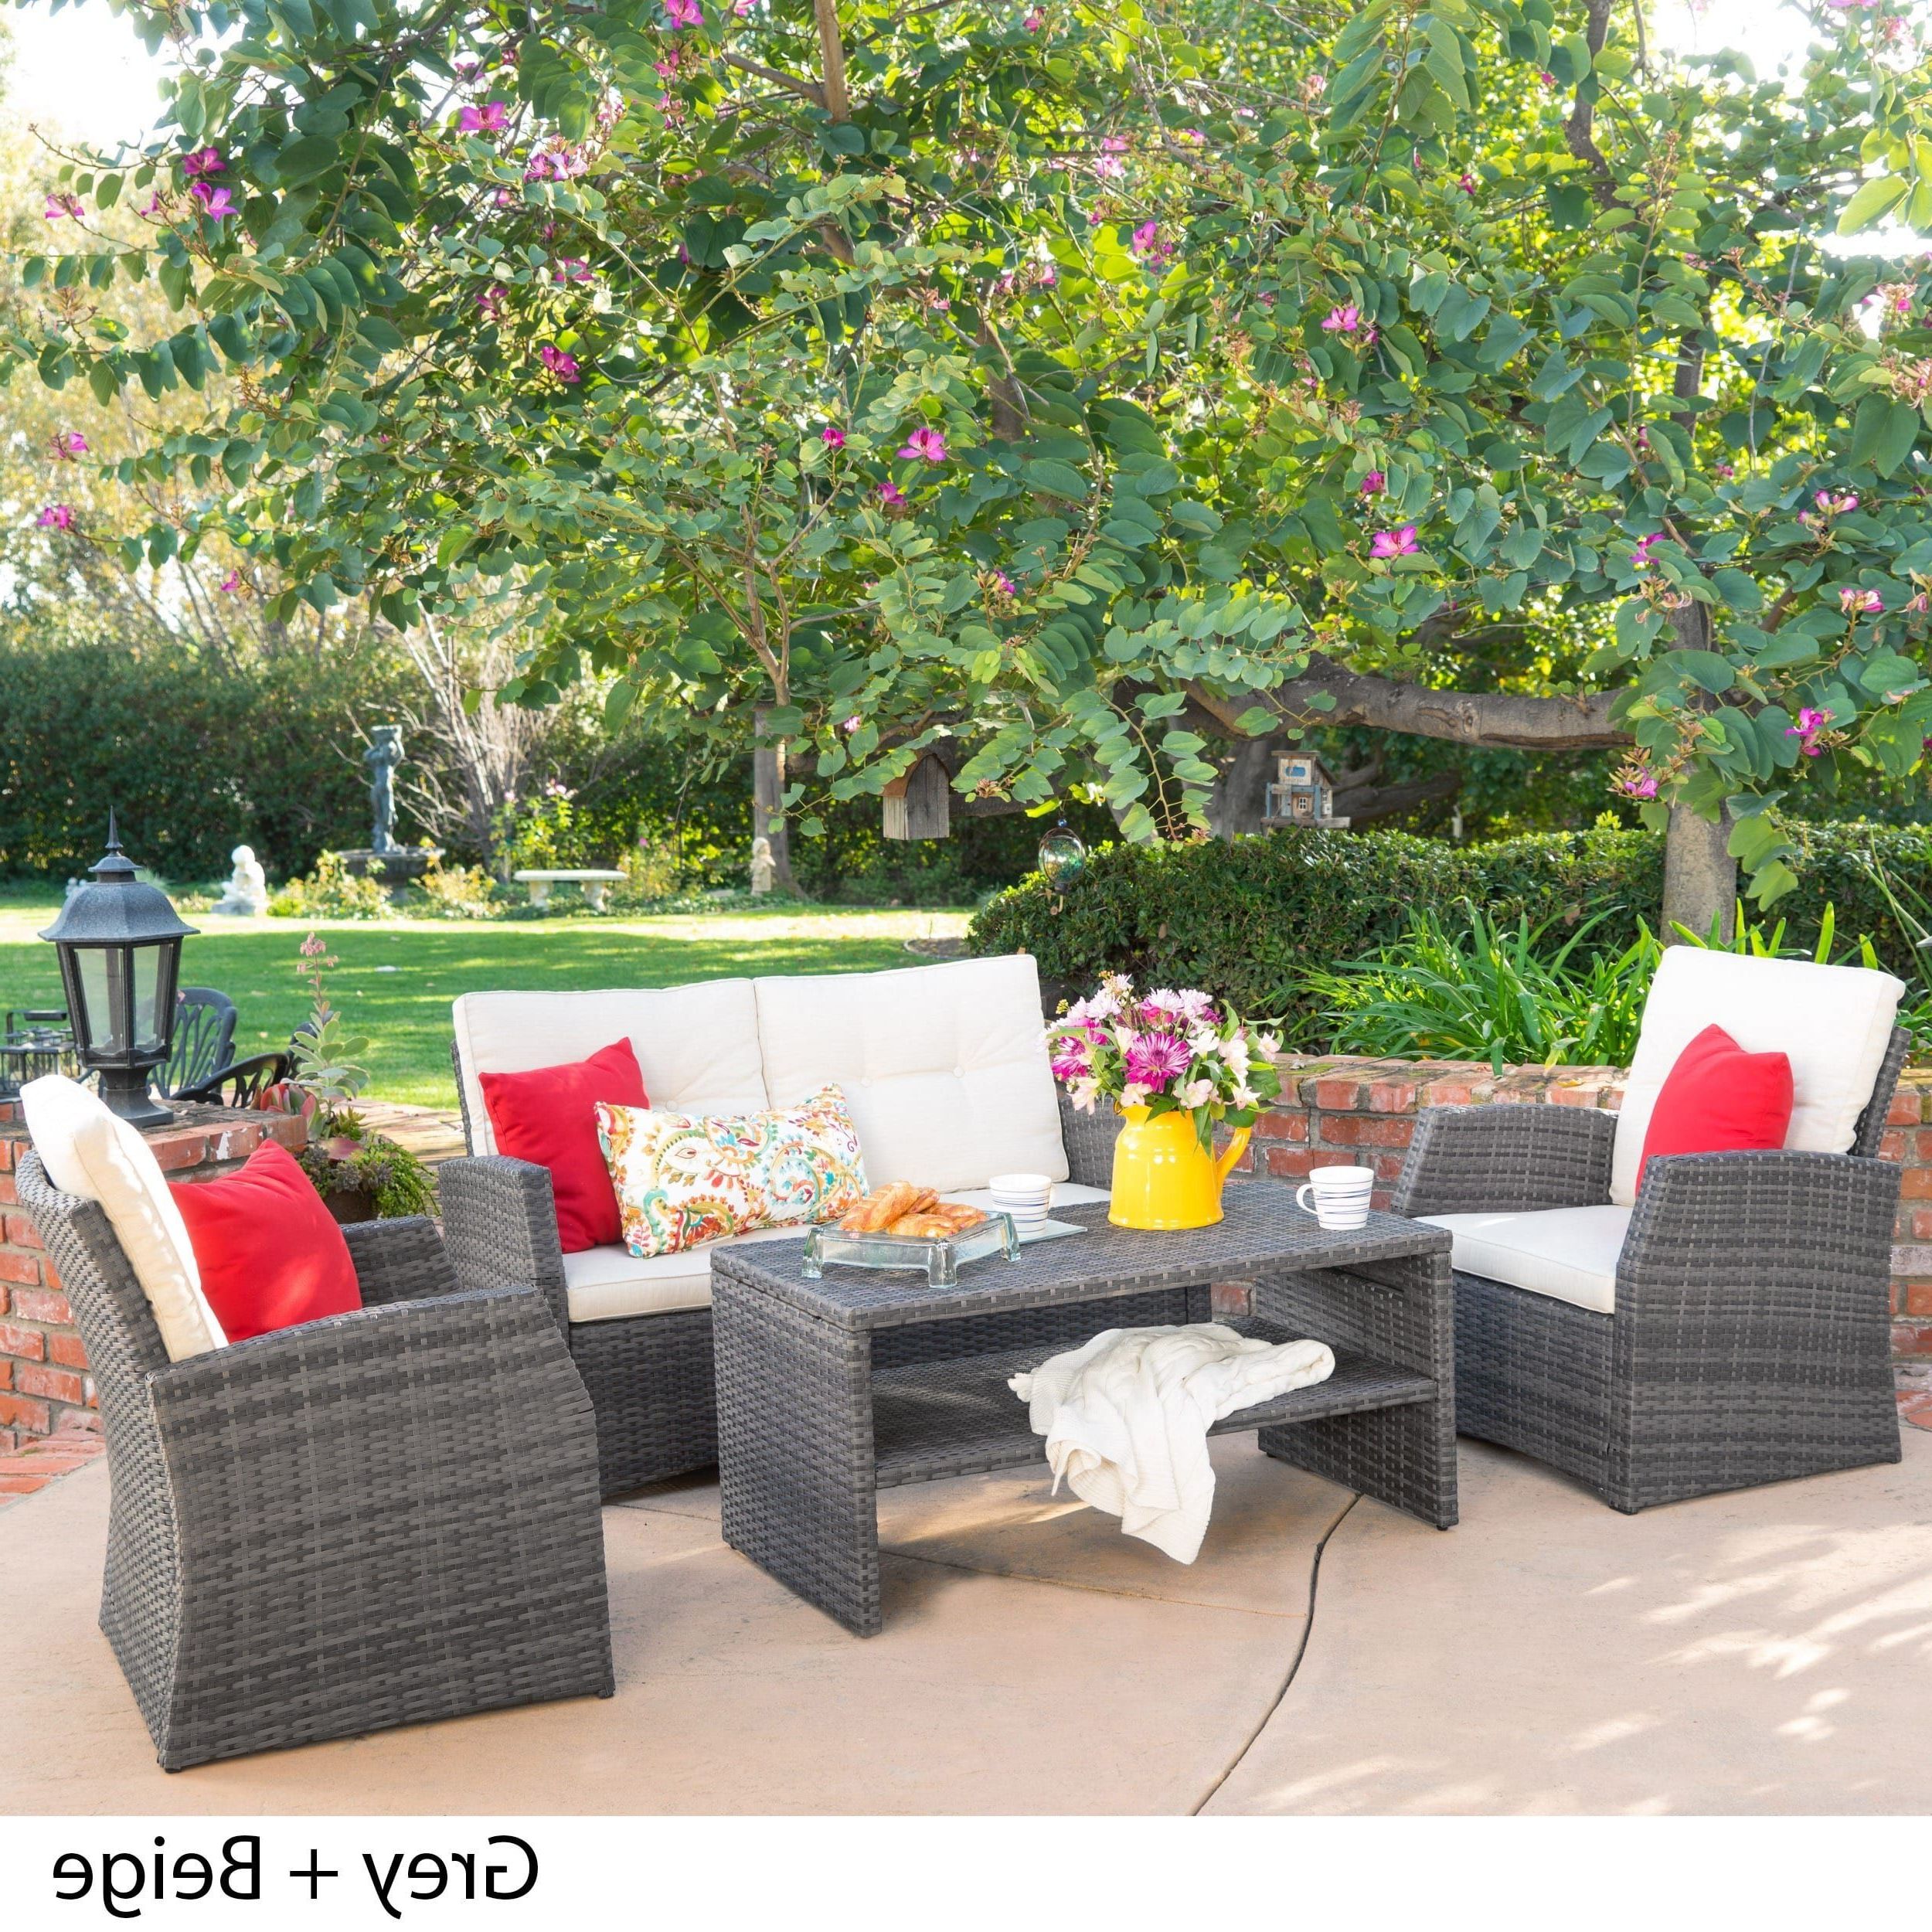 White 4 Piece Outdoor Seating Patio Sets In Well Known Sanger Outdoor 4 Piece Wicker Seating Setchristopher Knight Home (View 15 of 15)